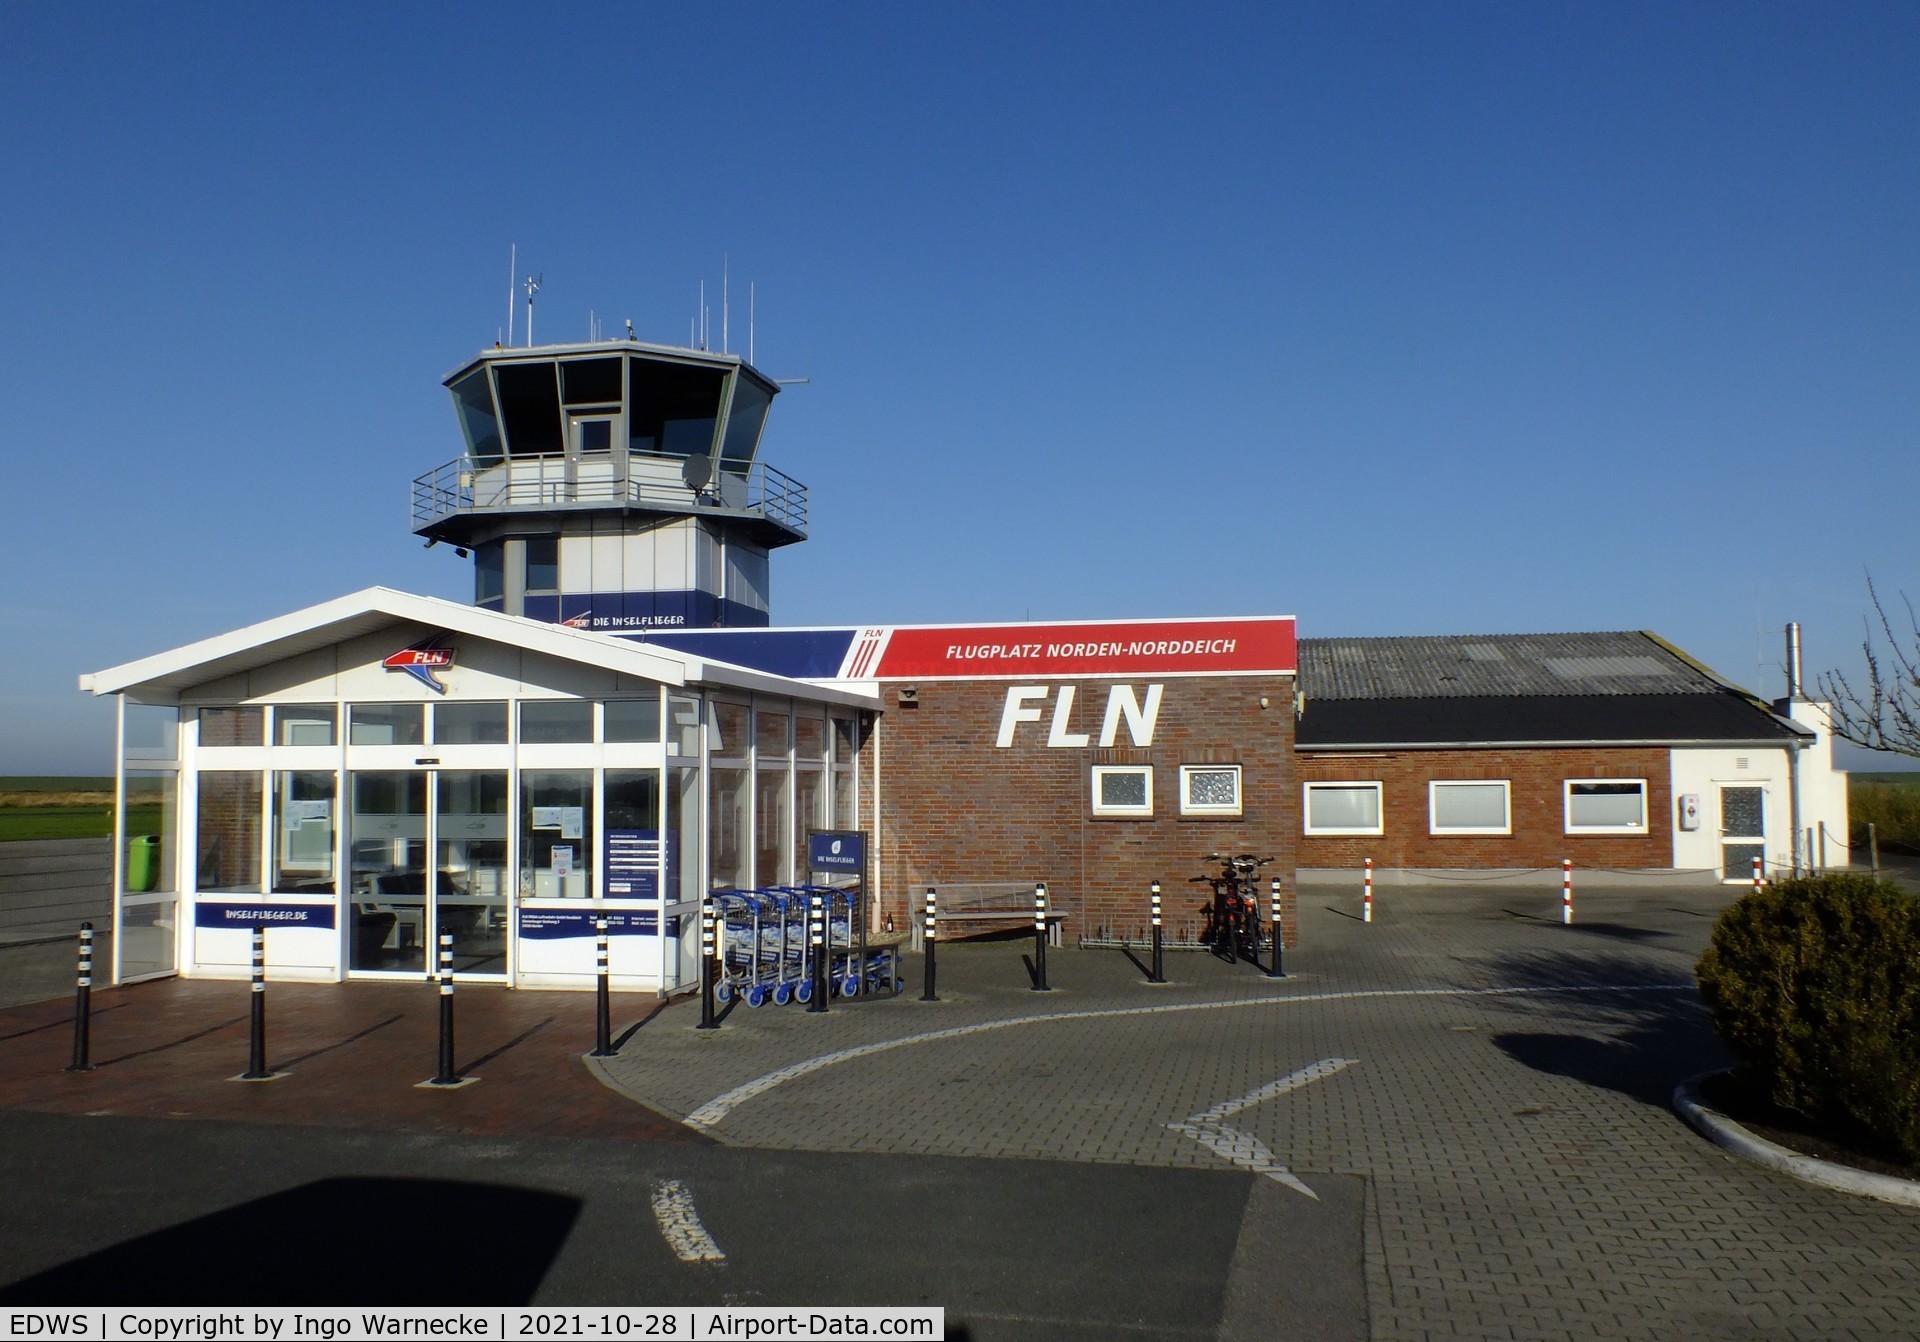 EDWS Airport - Norden-Norddeich airfield terminal and tower